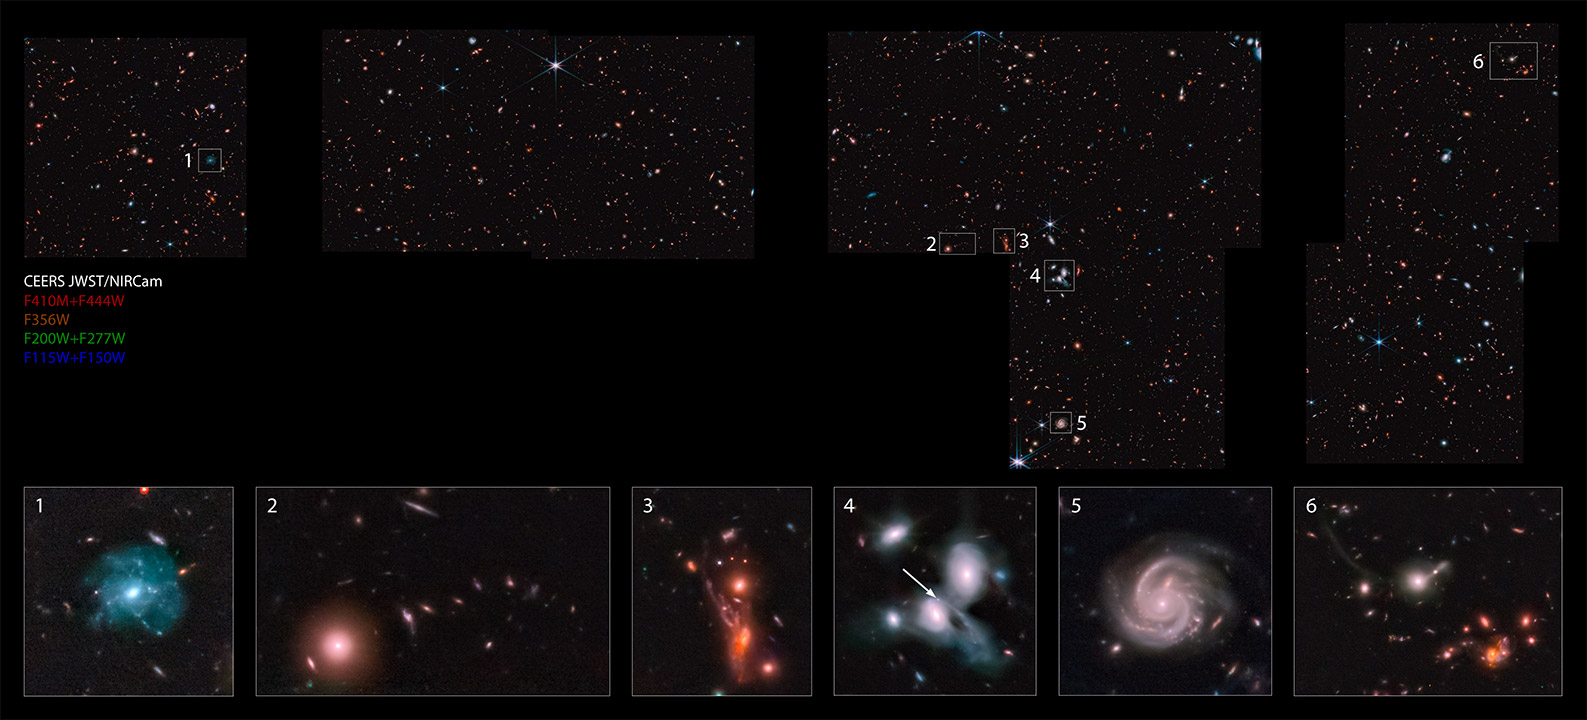 image of objects in space with insets showing more details.